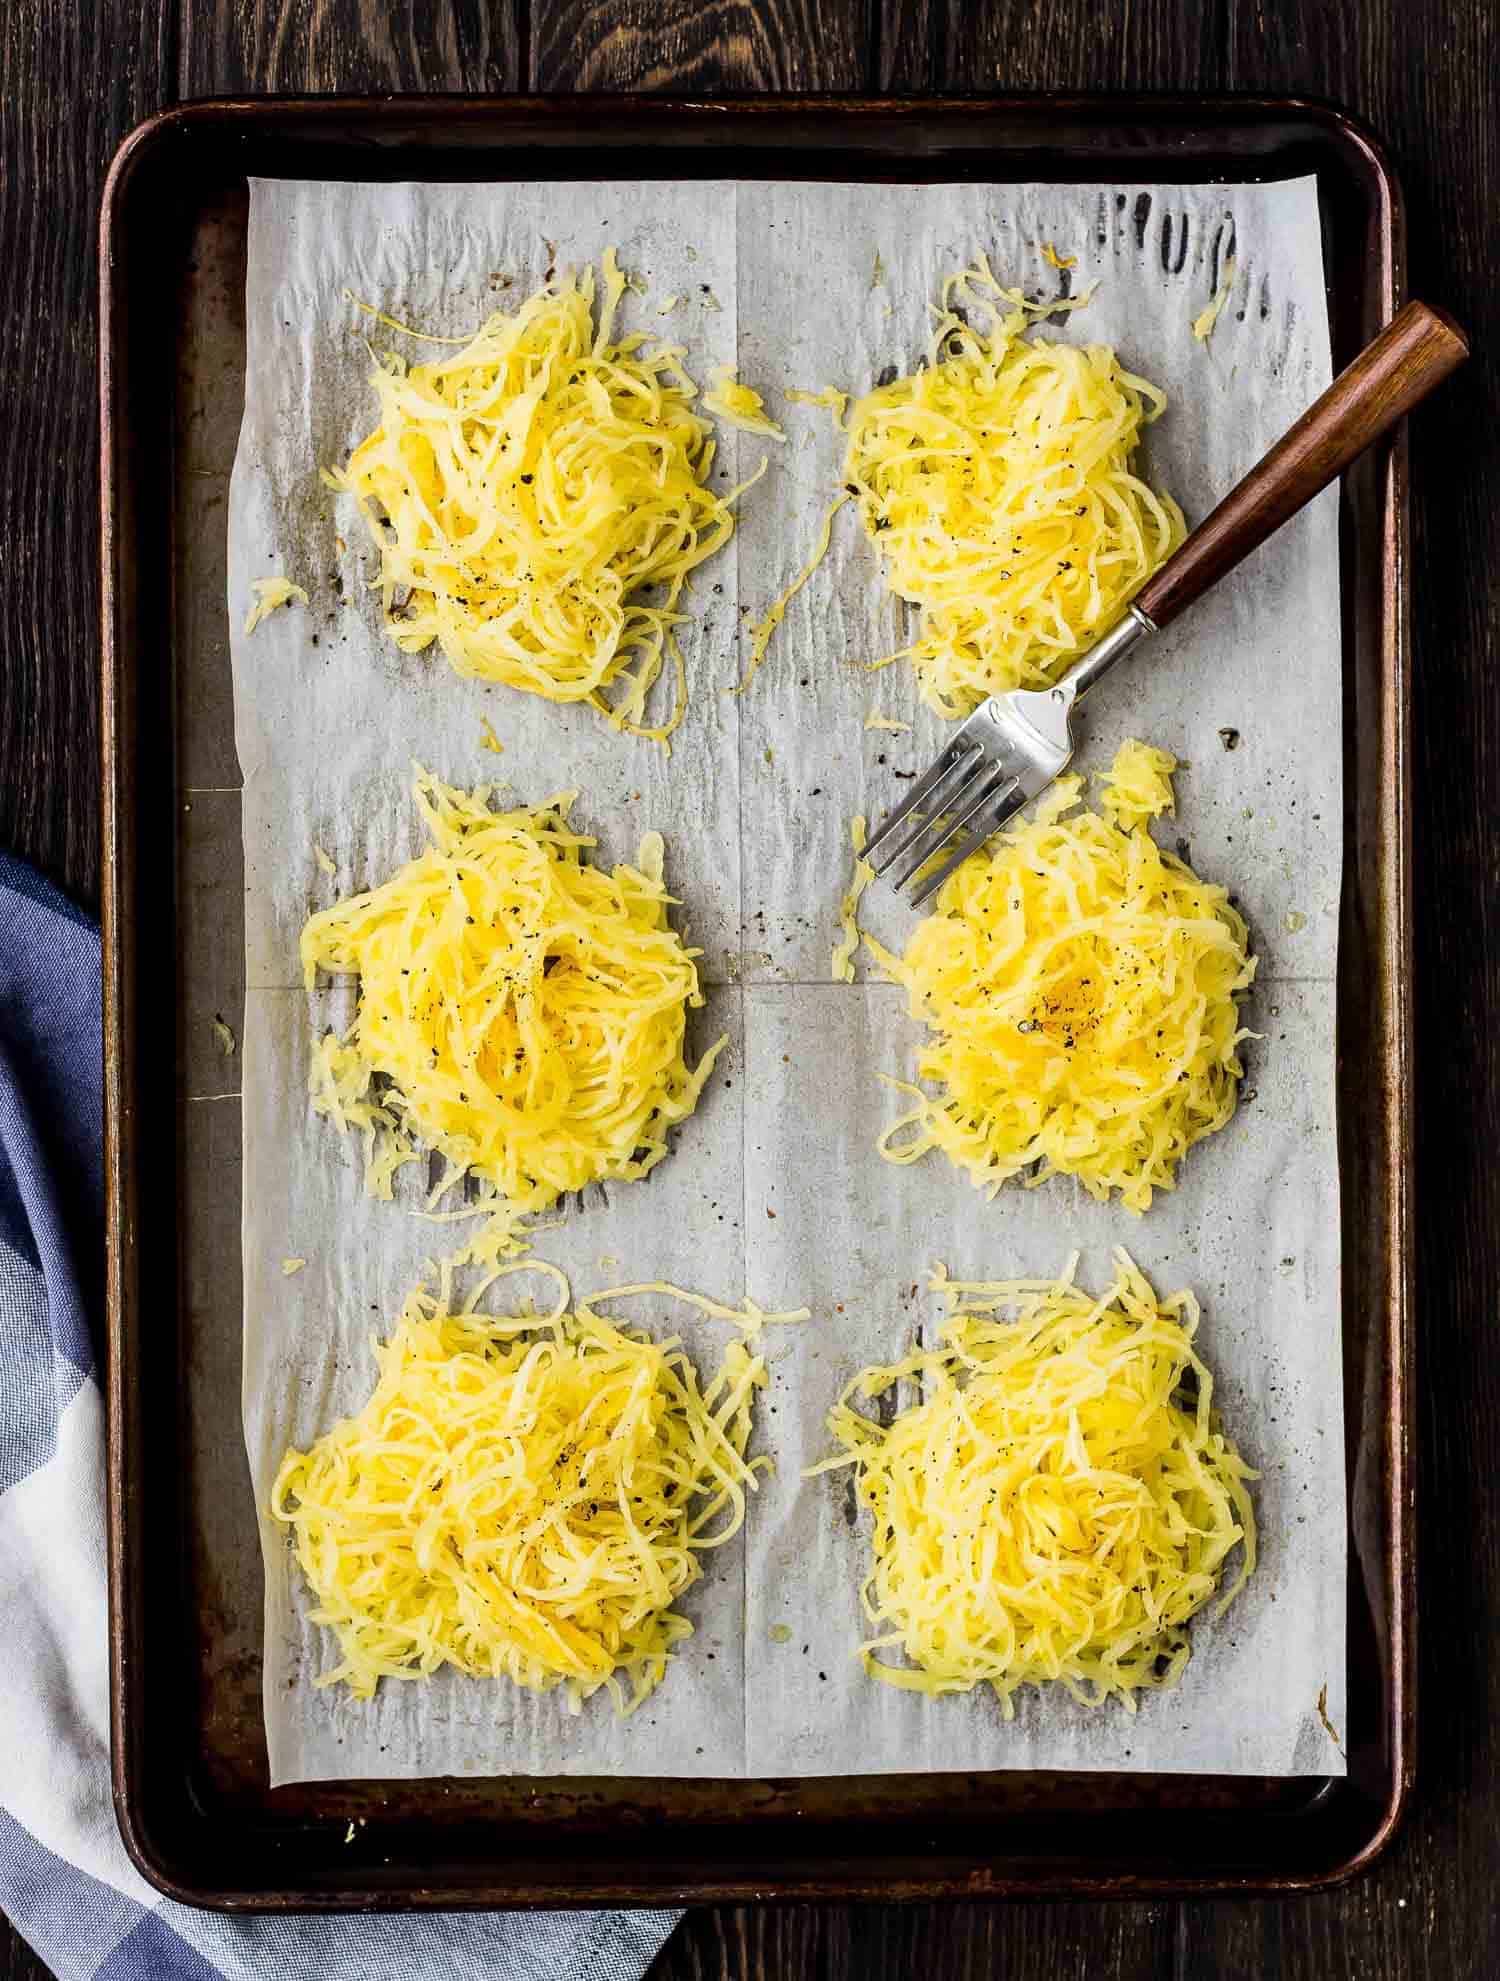 Piles of yellow spaghetti squash on a baking sheet lined with parchment.